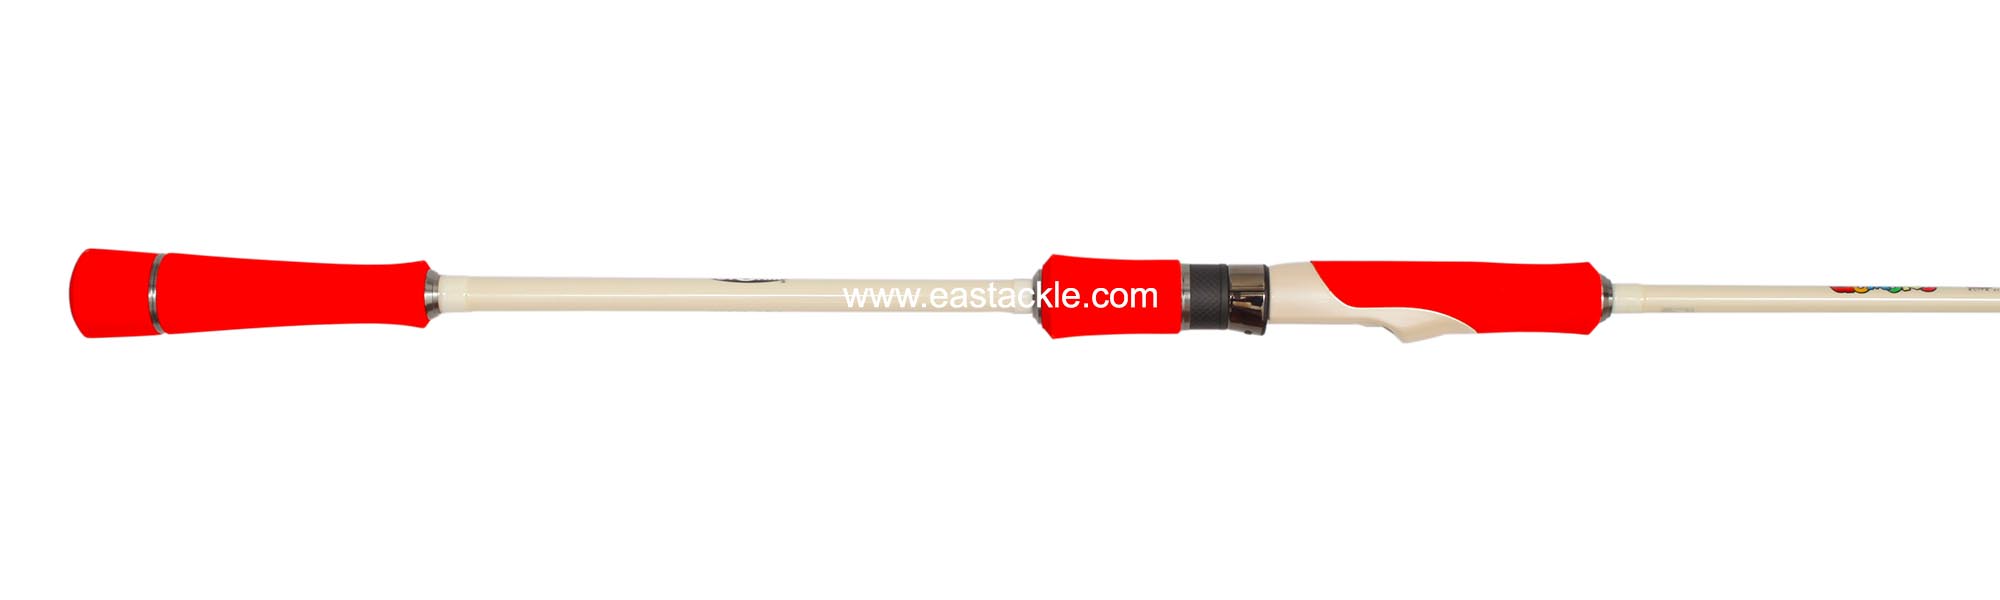 Storm - Gomoku - Erito Elite Jigging Game - GOS601L - Spinning Jigging Rod - Butt to Reel Seat Section (Side View) | Eastackle